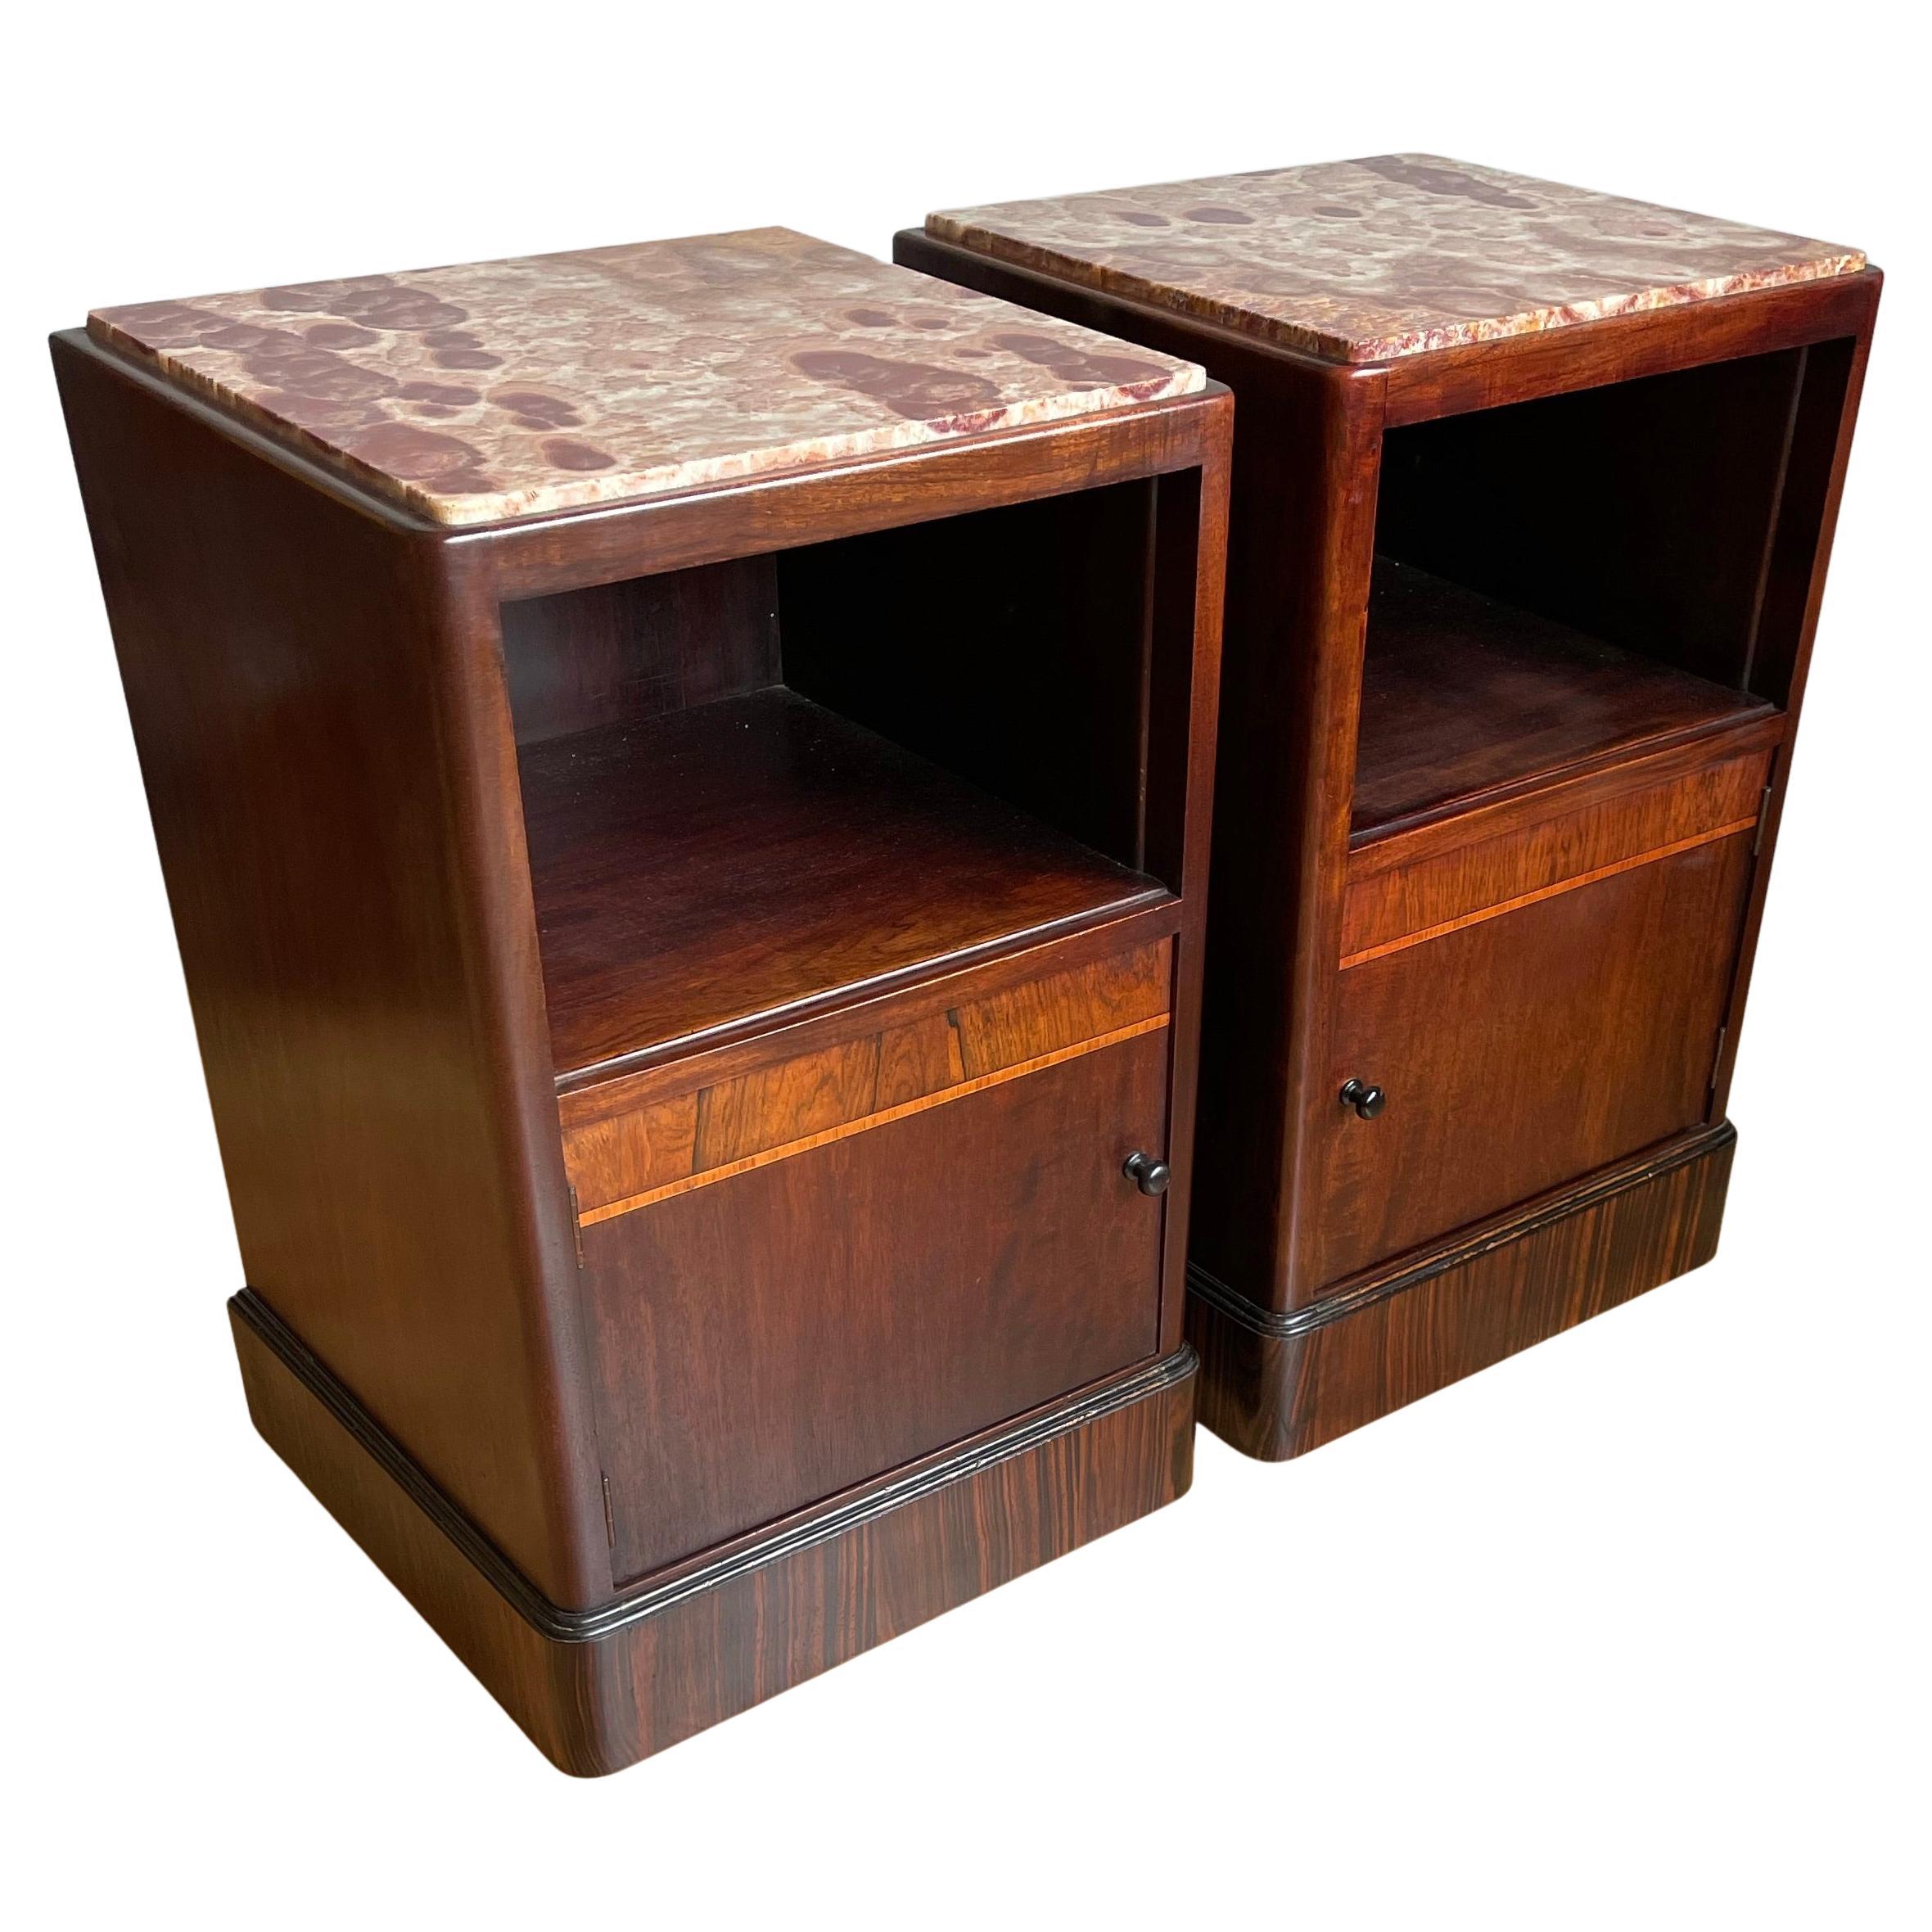 Stunning Art Deco Nightstands Tables w. Porcelain Interiors & Unique Marble Tops For Sale